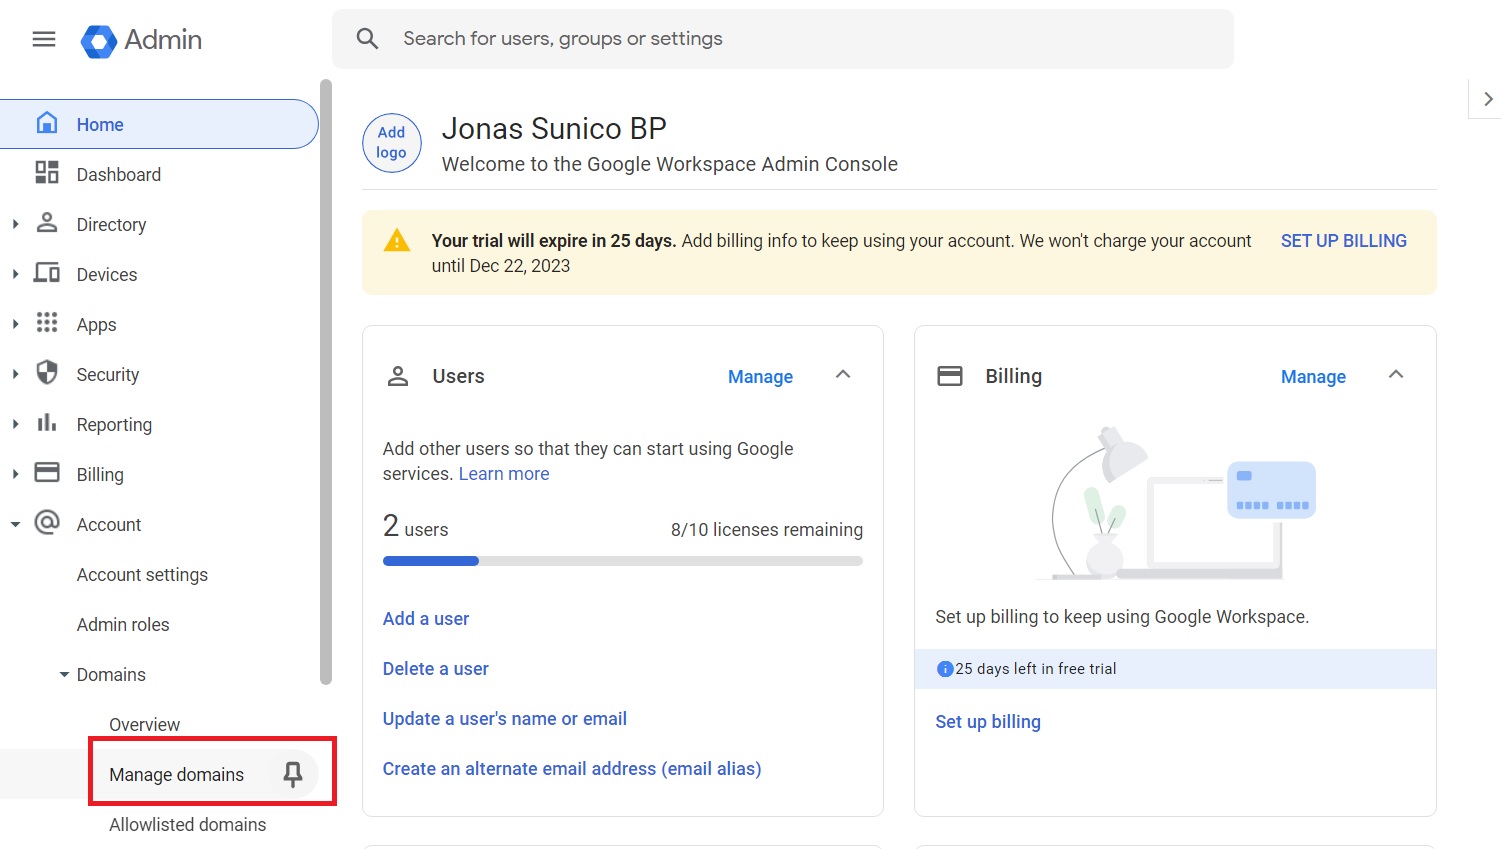 Manage domains setting in Google Admin Console